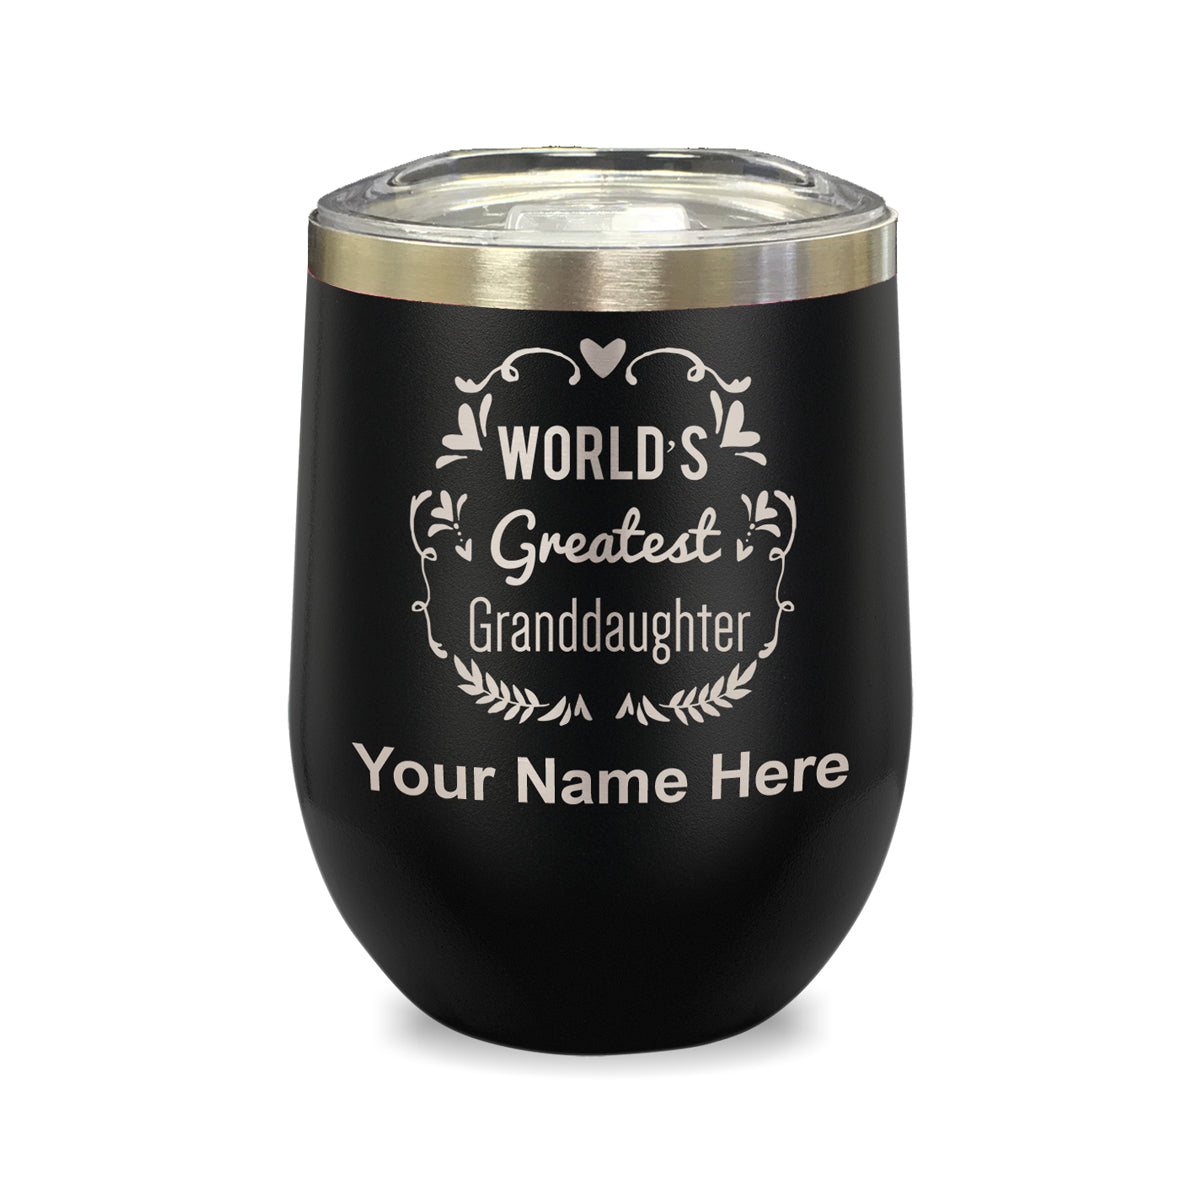 LaserGram Double Wall Stainless Steel Wine Glass, World's Greatest Granddaughter, Personalized Engraving Included